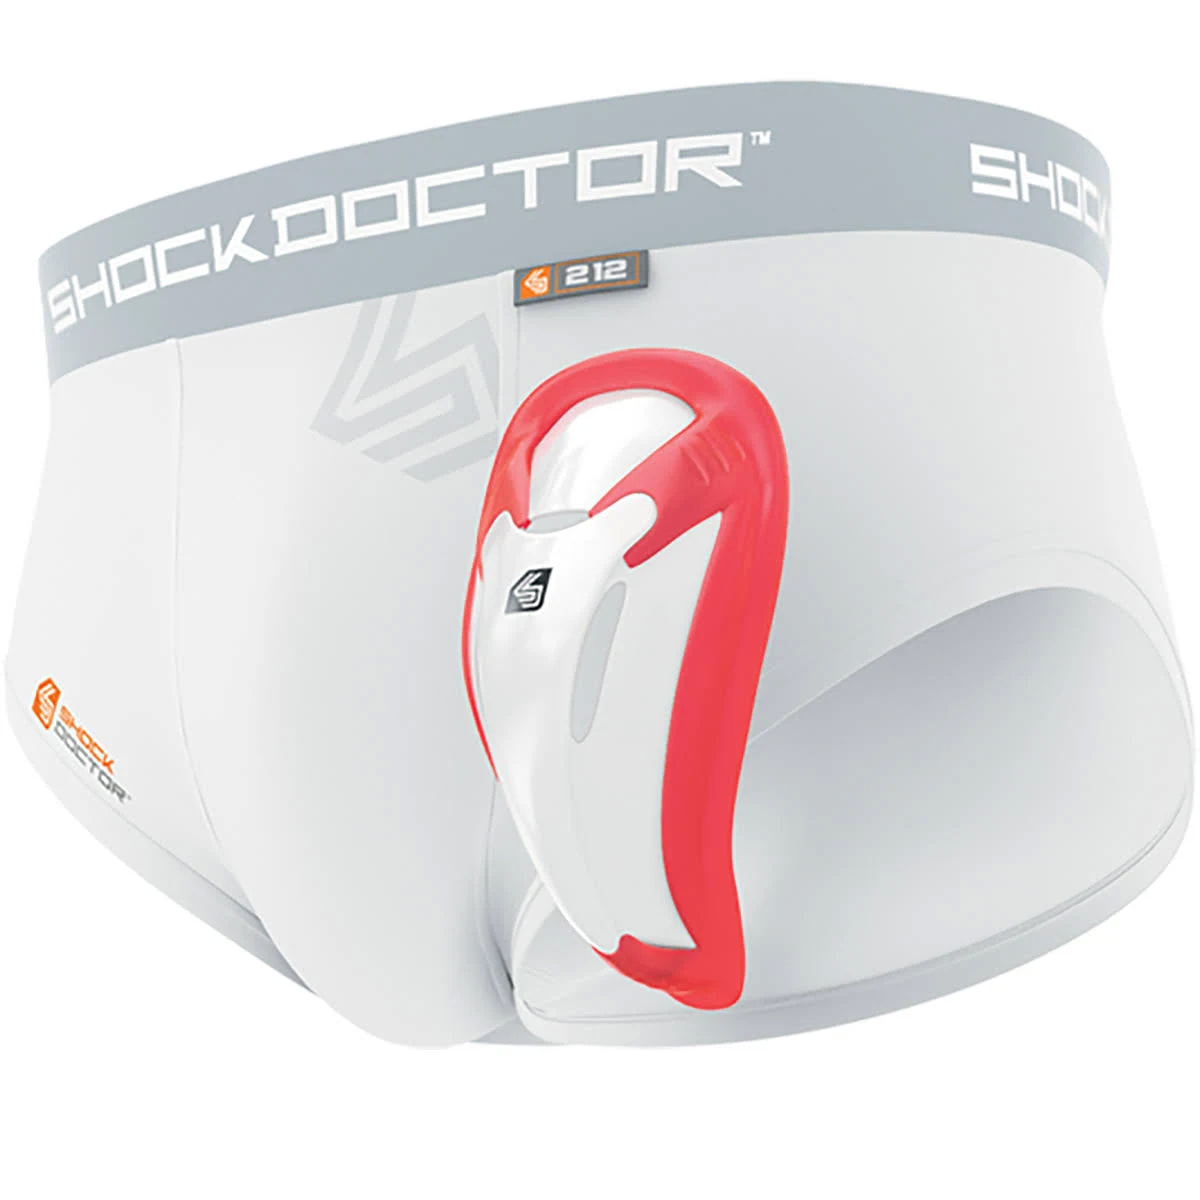 Shockdoctor Core Brief with Bioflex Cup - Boys Small